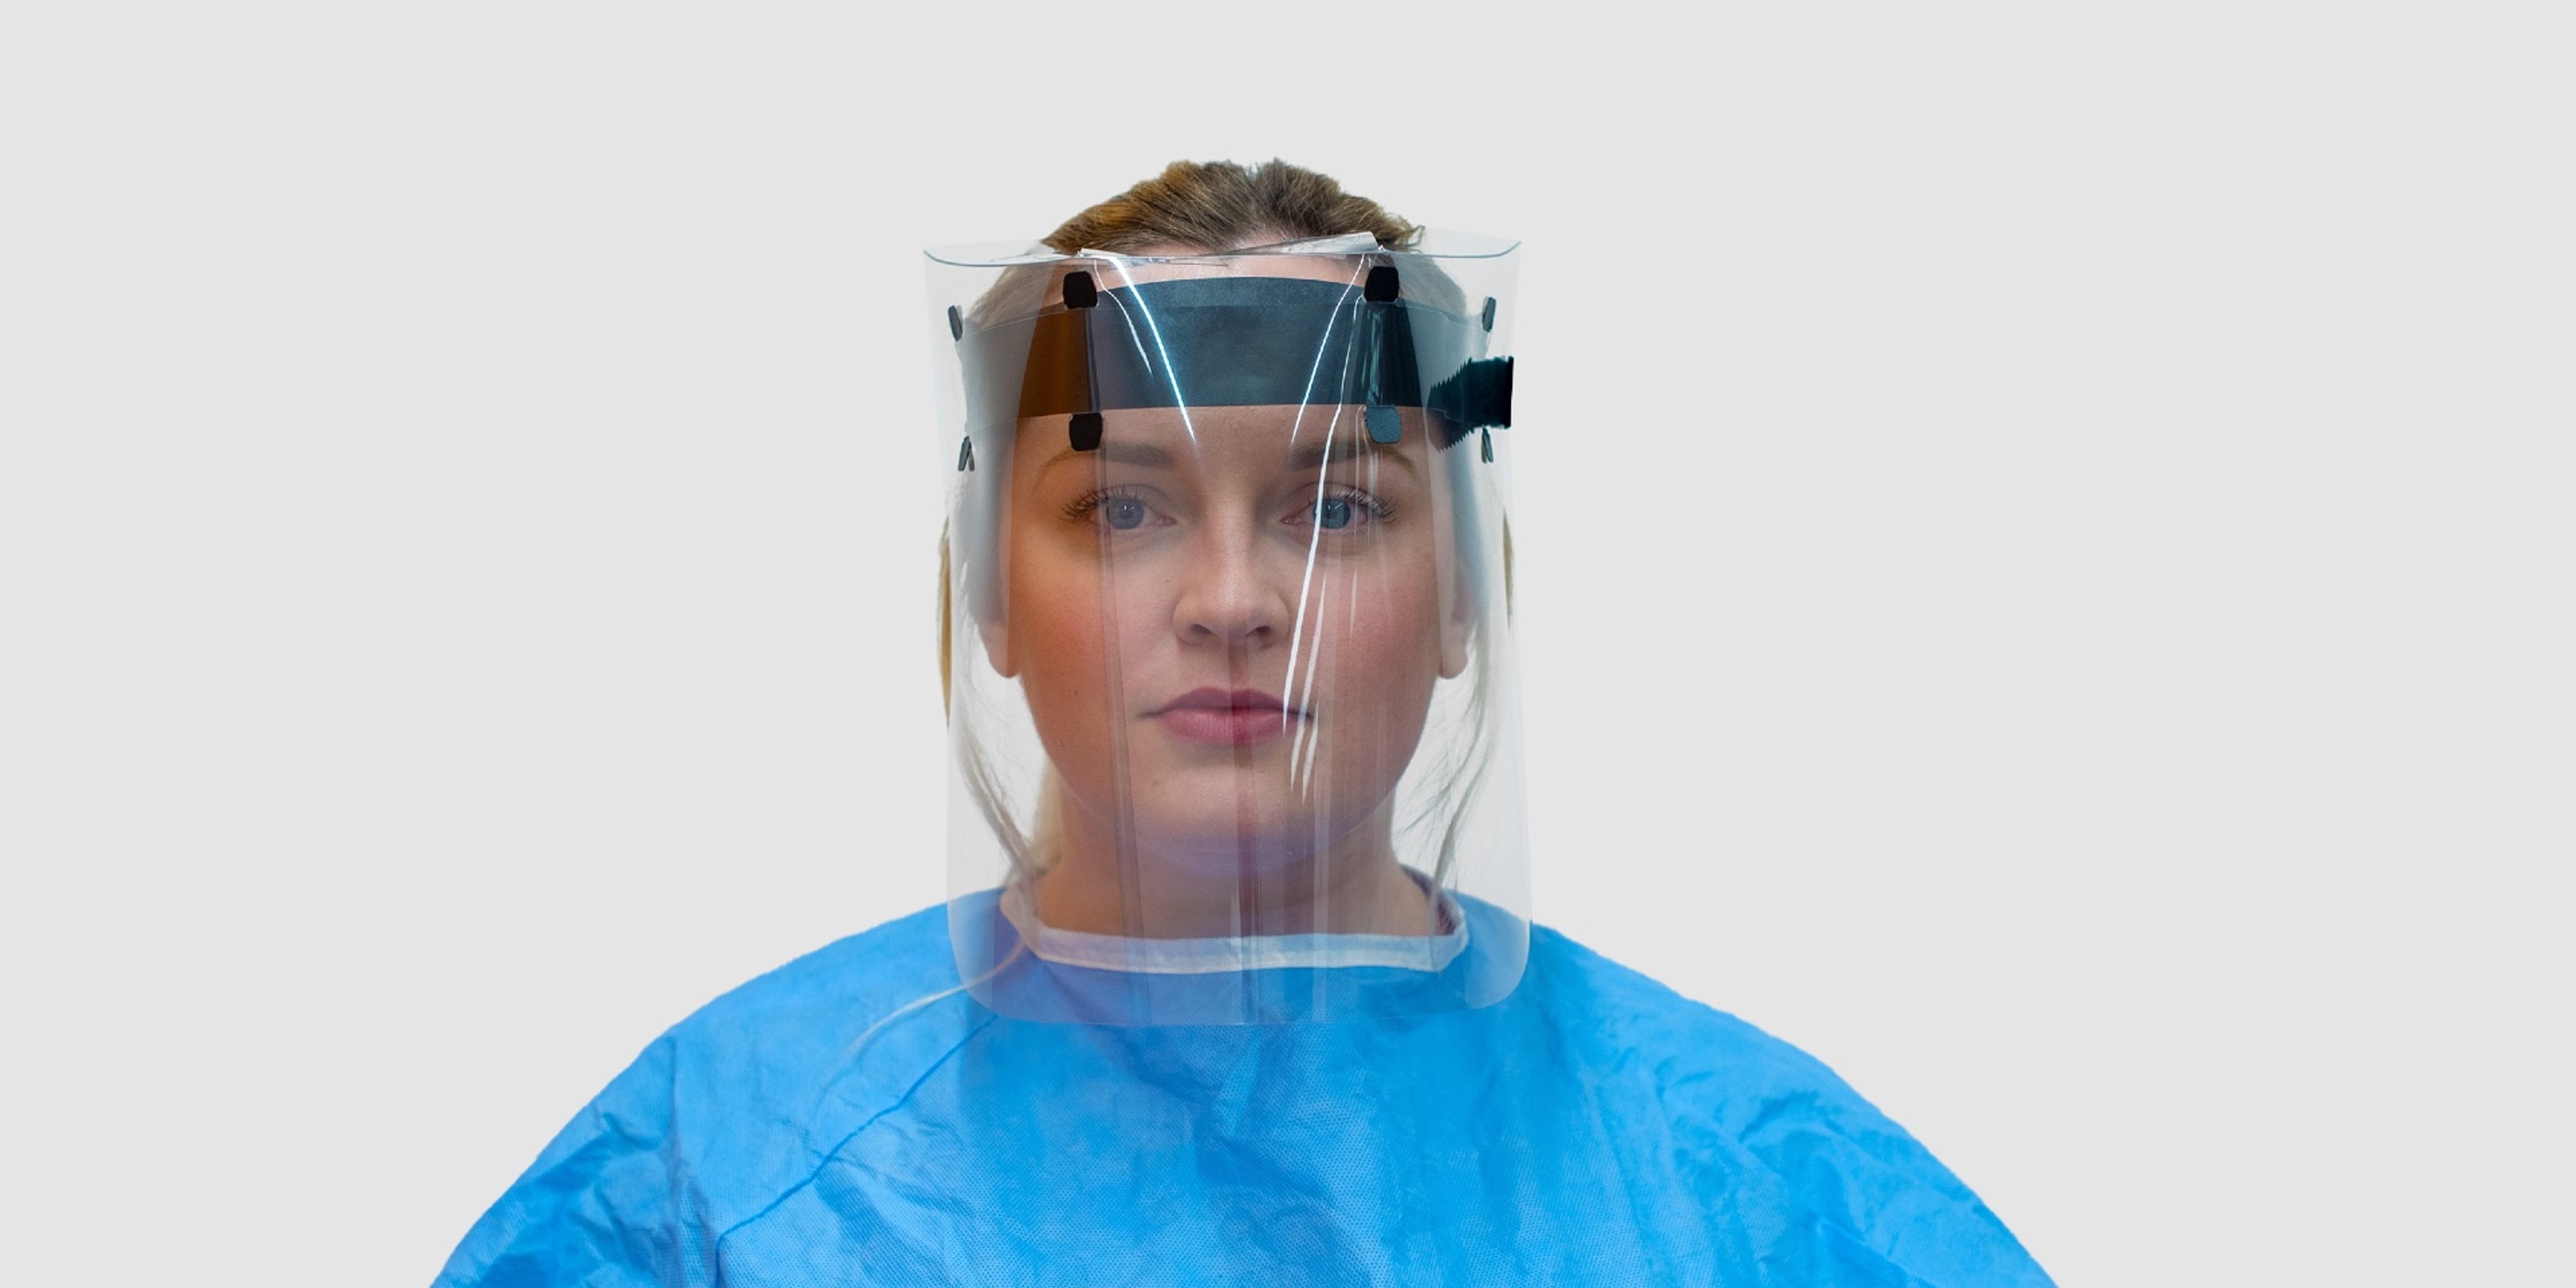 GetPPE NCL: PPE for front-line health workers during COVID-19